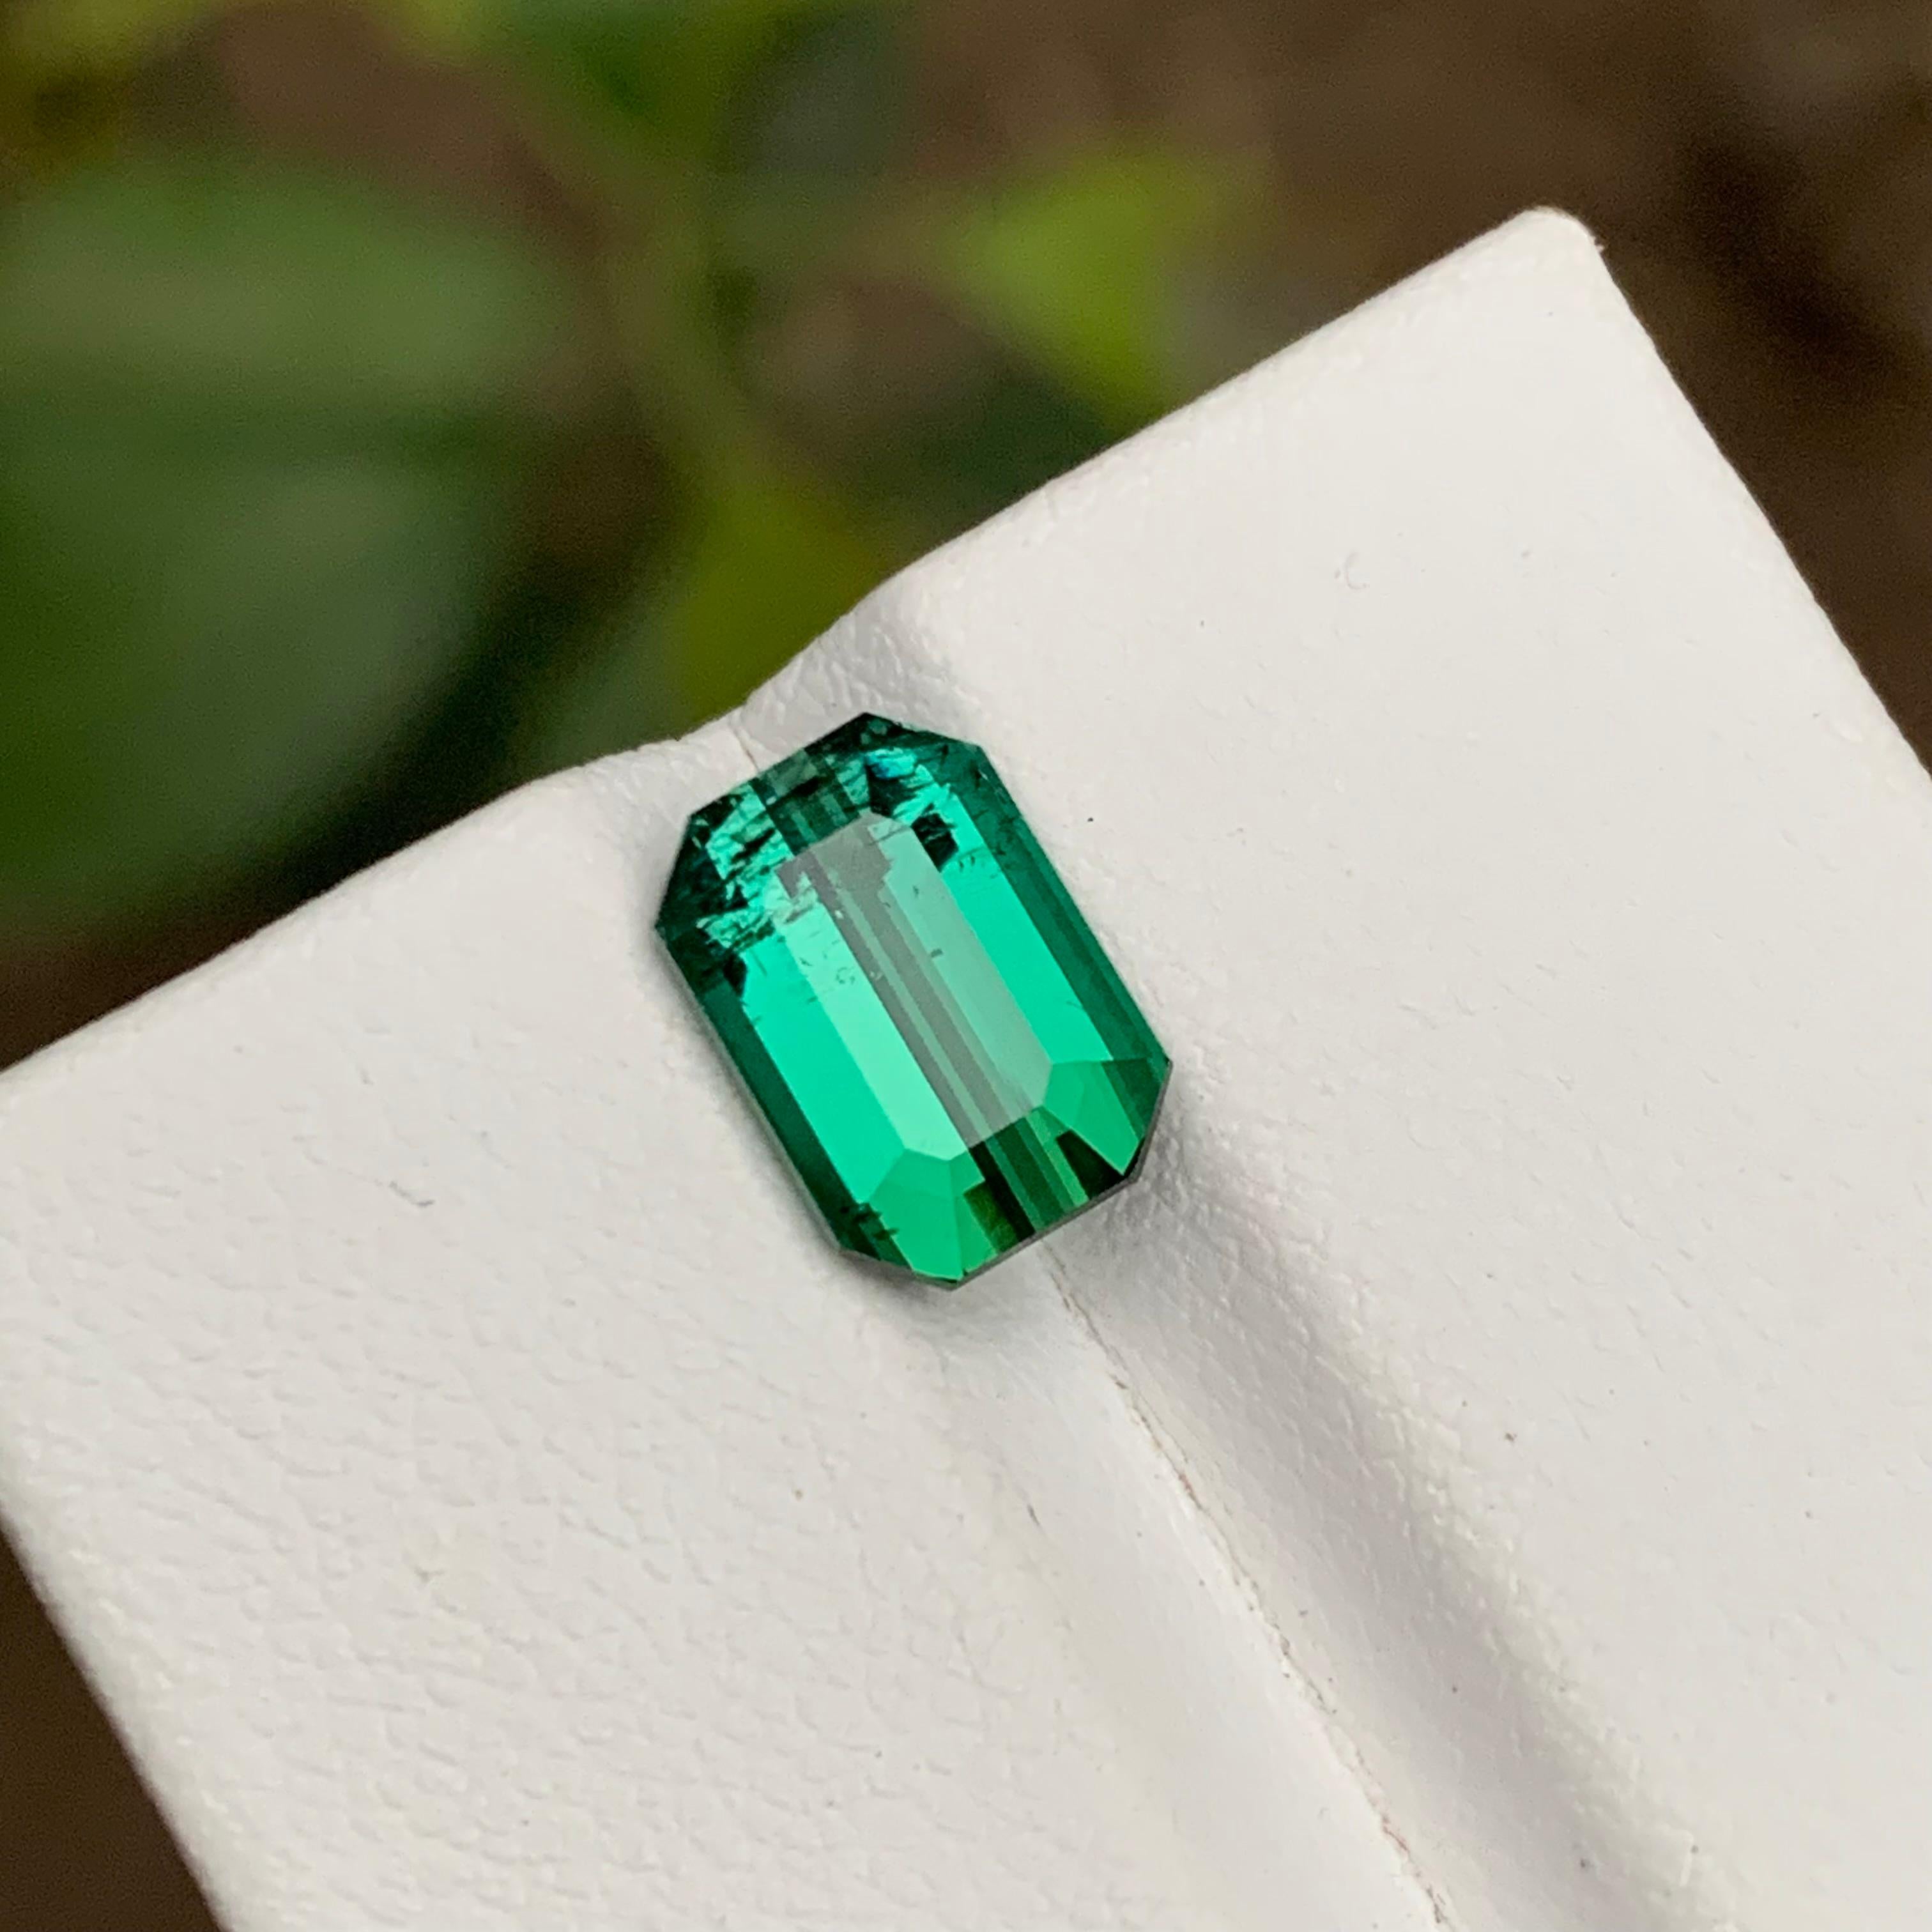 GEMSTONE TYPE: Tourmaline
PIECE(S): 1
WEIGHT: 3.15 Carat
SHAPE: Emerald
SIZE (MM): 9.62 x 6.71 x 5.49
COLOR: Bluish Green
CLARITY: Slightly Included 
TREATMENT: None
ORIGIN: Afghanistan
CERTIFICATE: On demand

Rare and breathtaking marvel of nature: